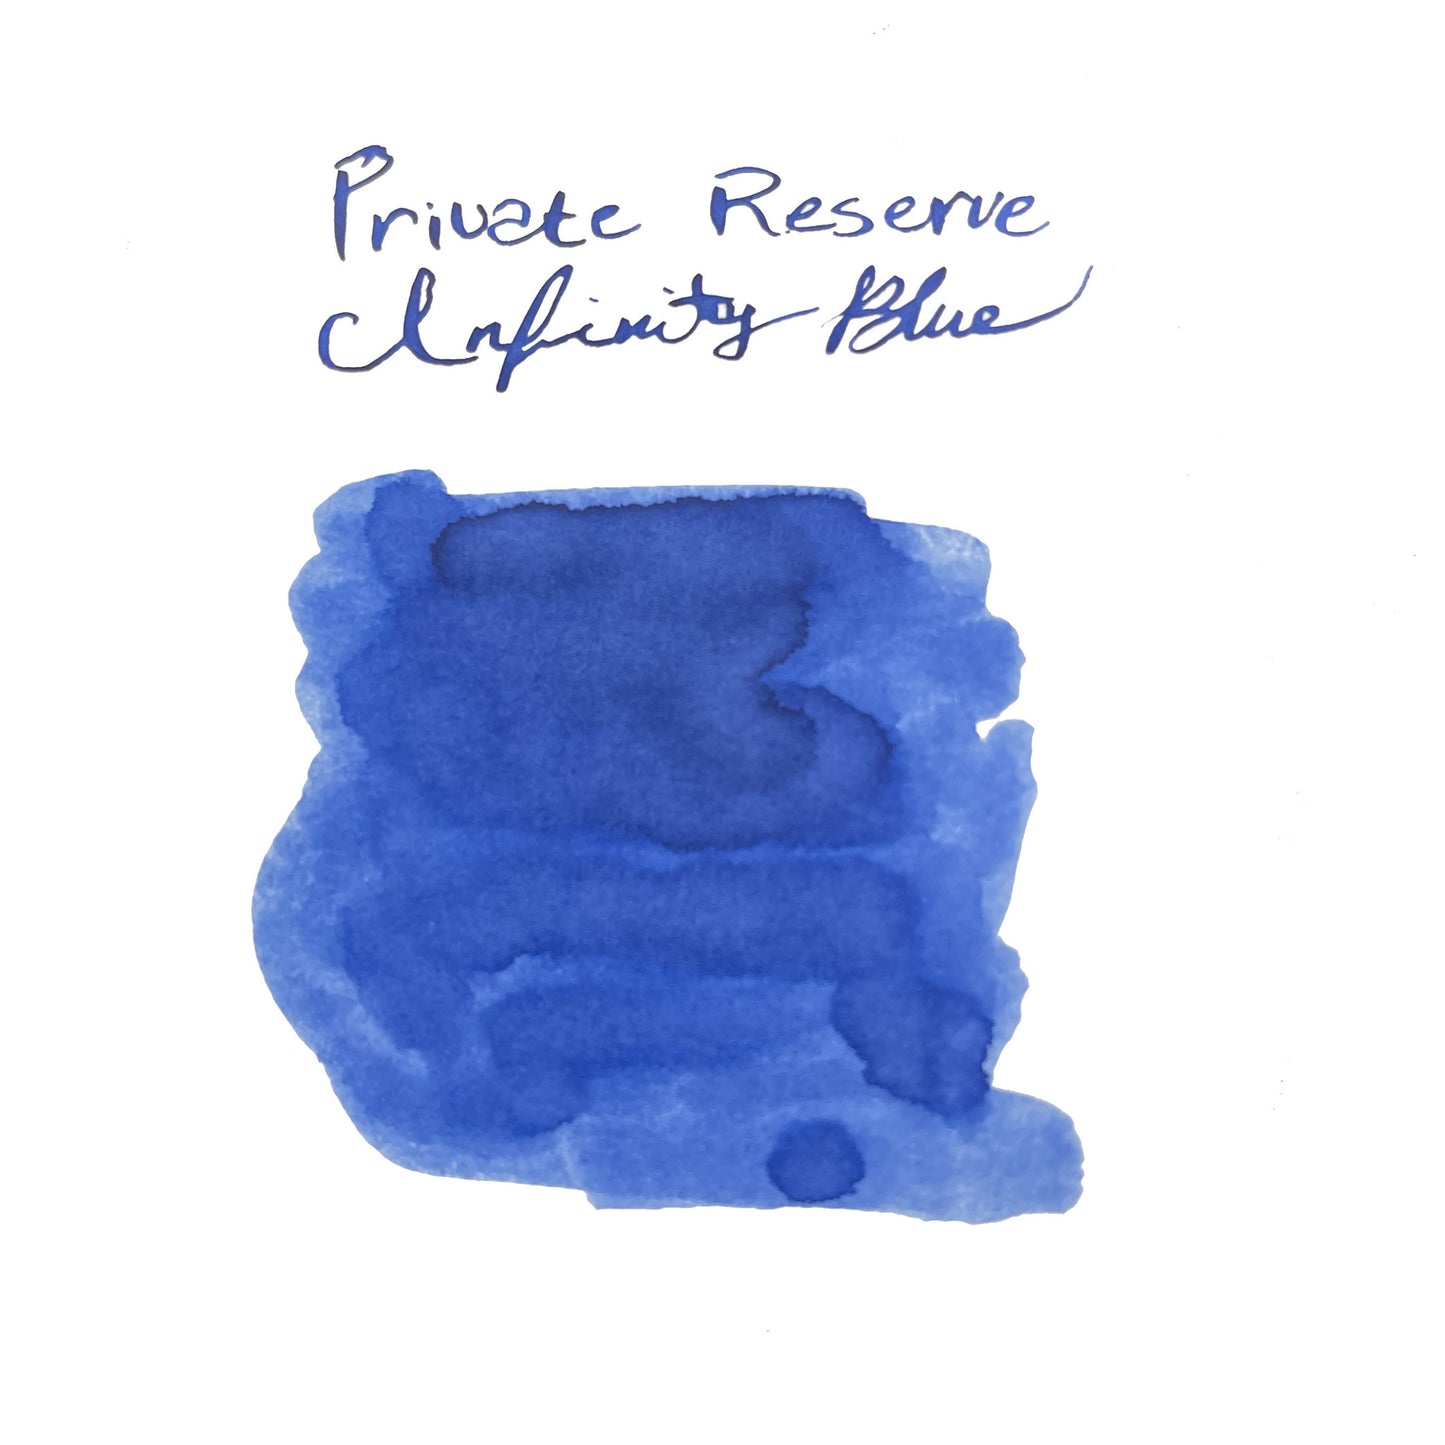 Private Reserve Infinity Blue (60ml) Bottled Ink